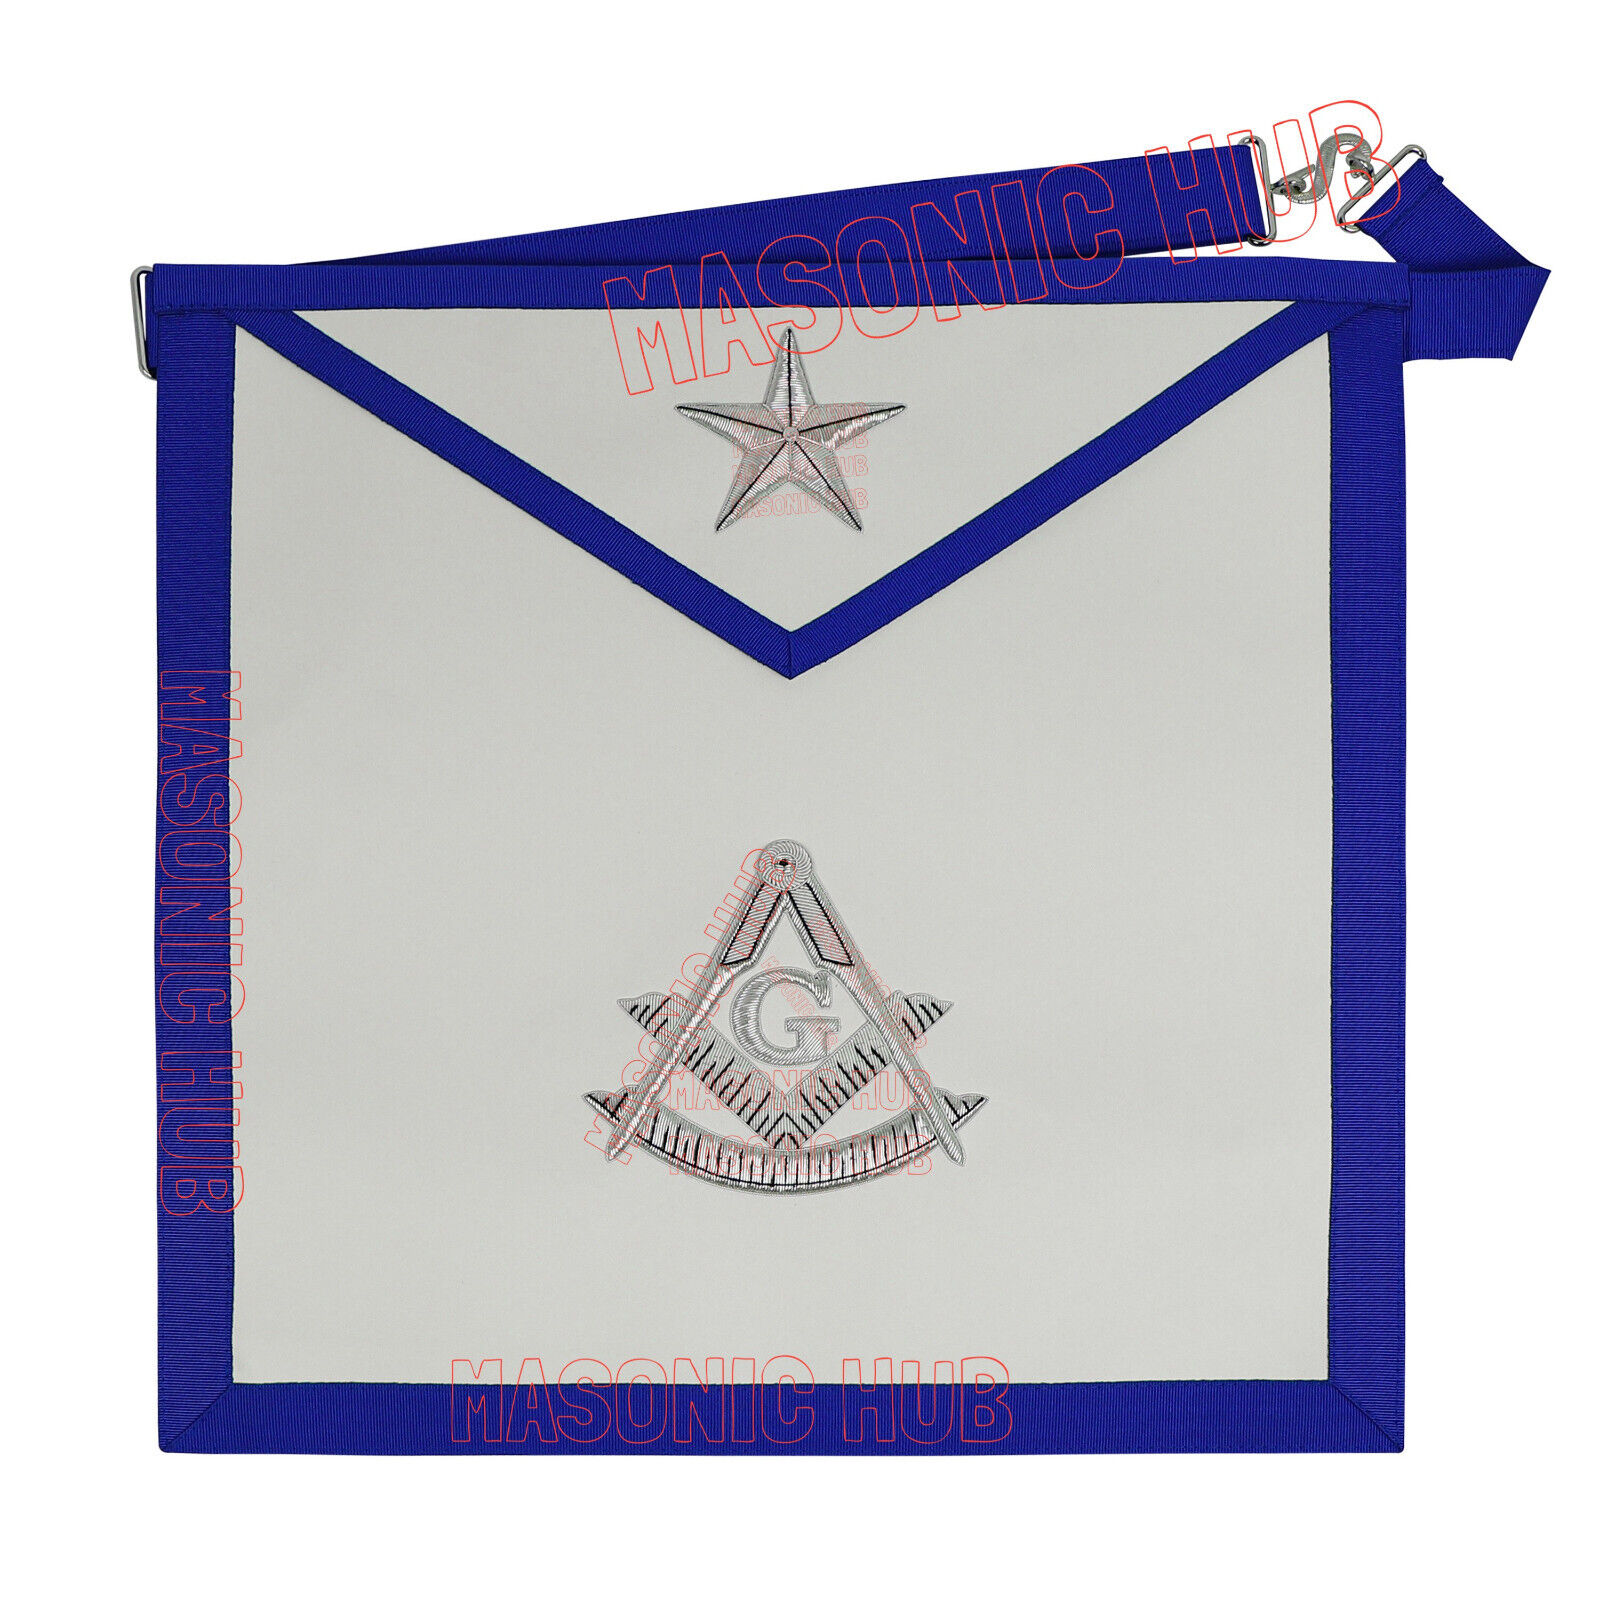 Authentic LONE STAR Texas Past Master Apron Embodying Craftsmanship and Heritage